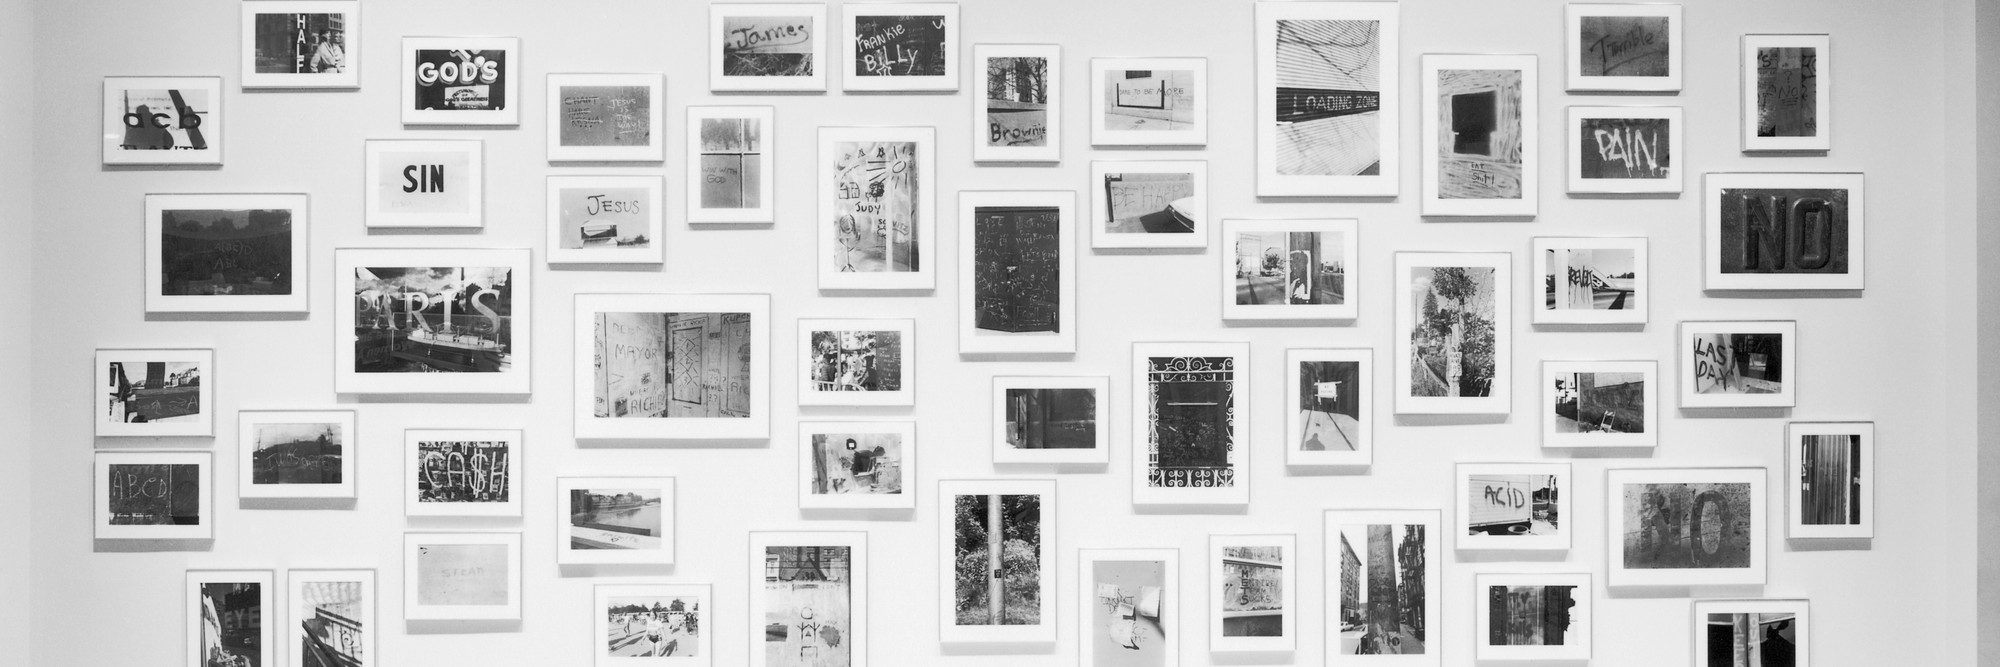 Lee Friedlander: Letters from the People | MoMA